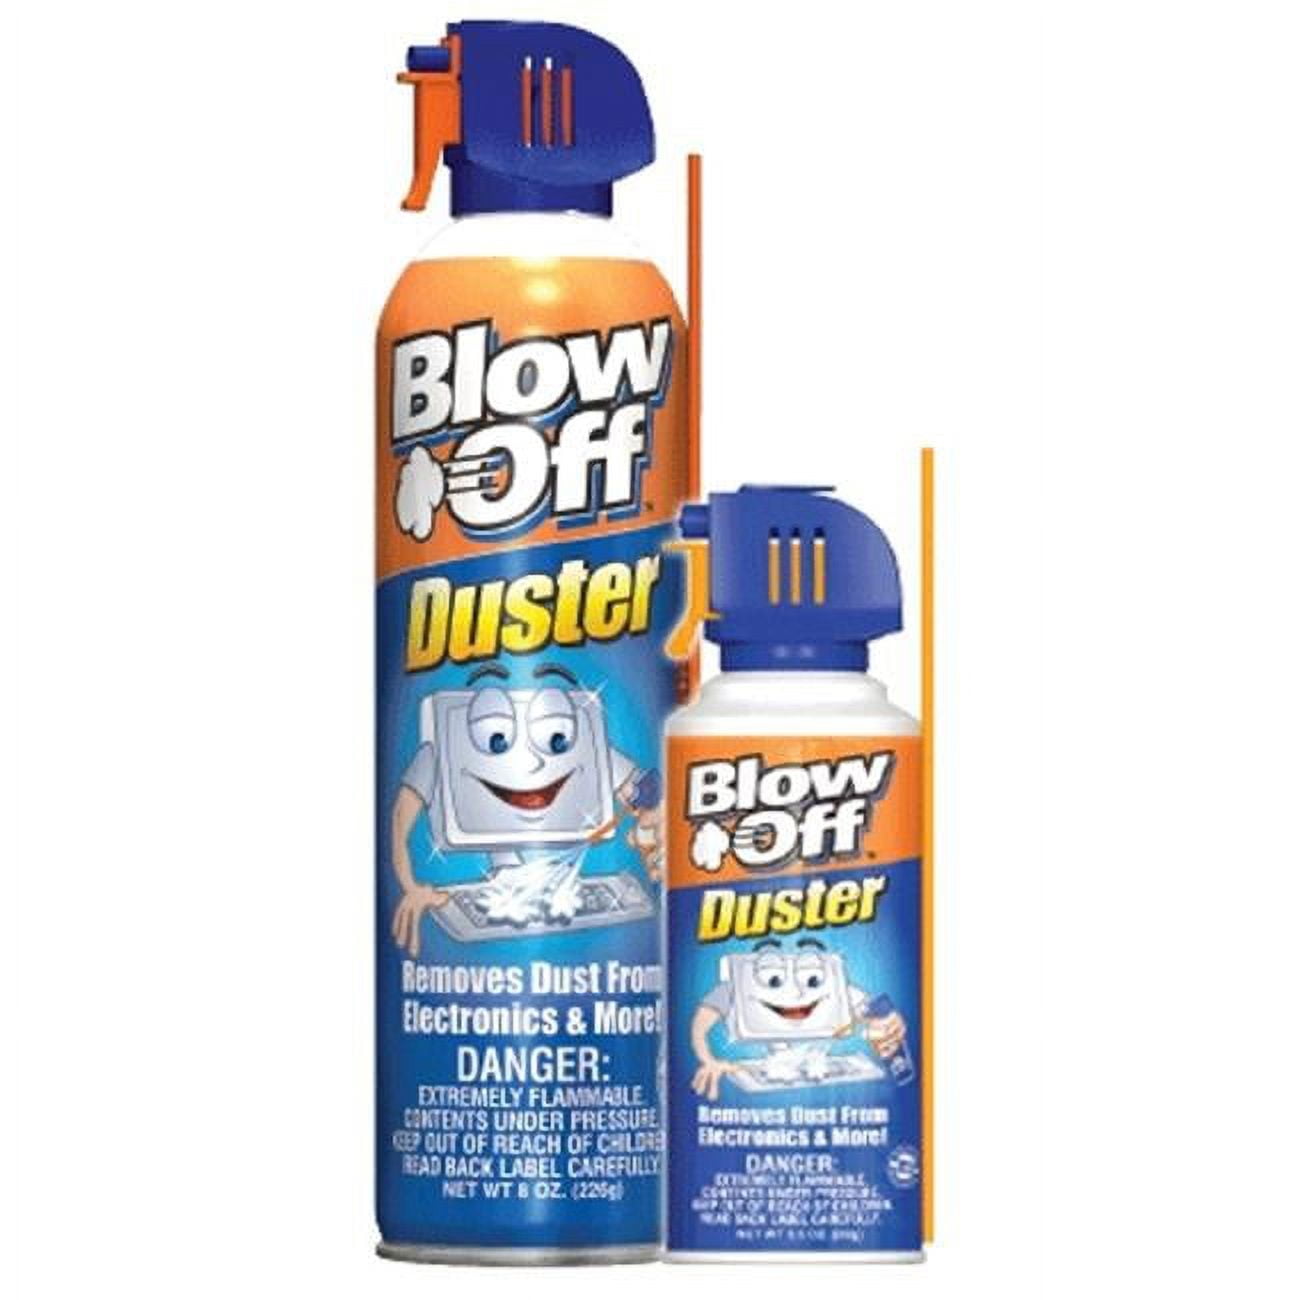  Compressed Air Duster Can MAX Professional Cleaner 1111 Blow  Off Non-toxic & No Bitternt 8oz. Stop the Build-up of Dust in Your  Electronics, Clogging up the Cooling Fan. Pack of 2 